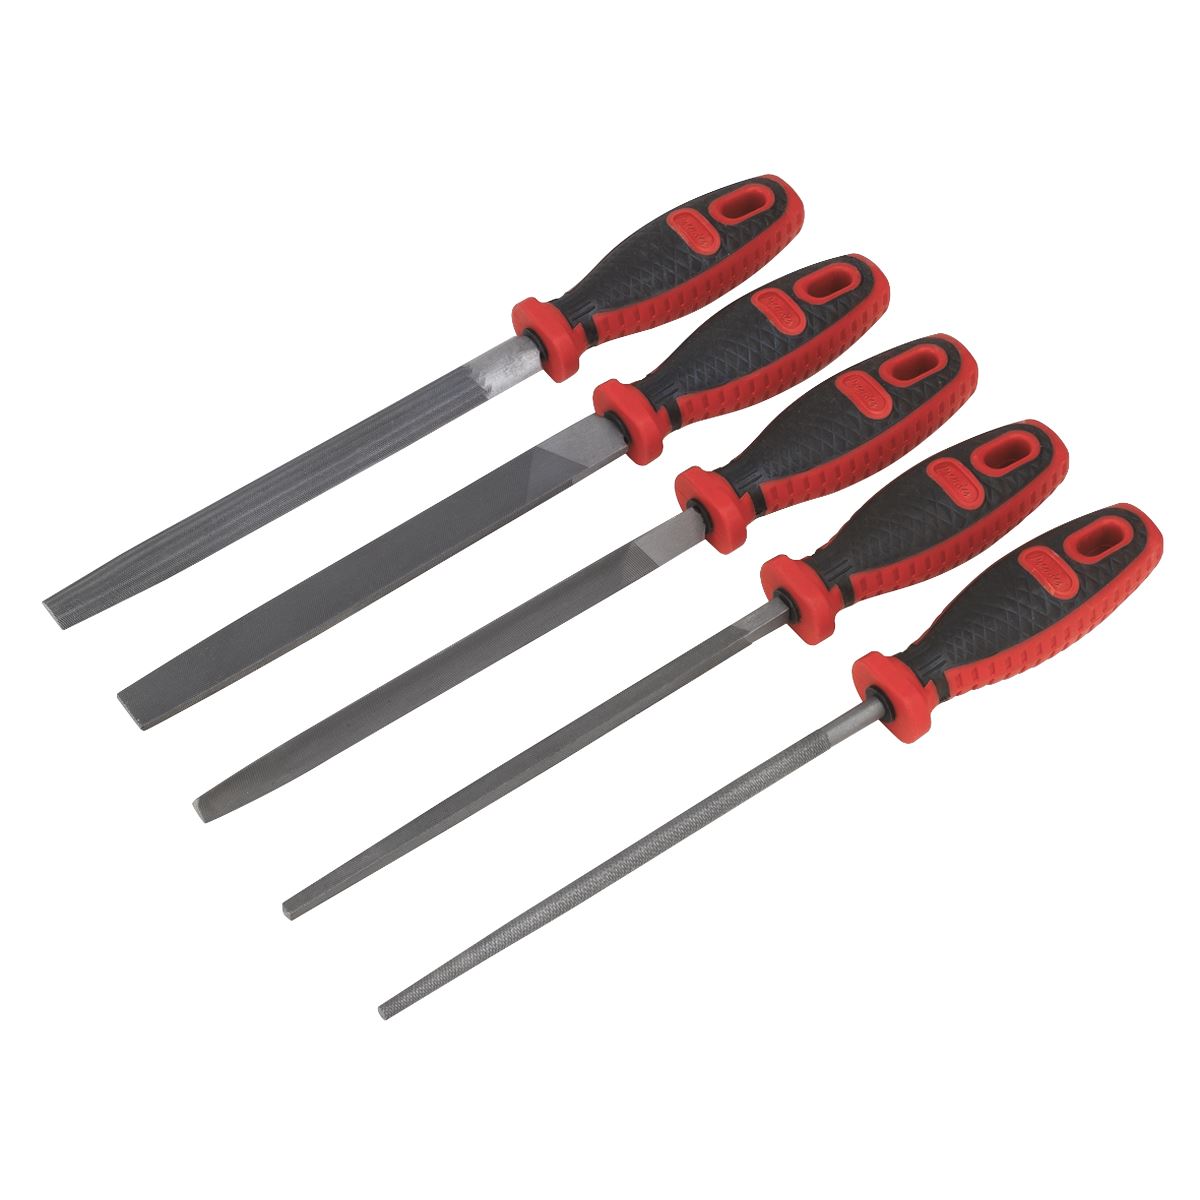 Sealey Premier Smooth Cut Engineer’s File Set 5pc 200mm